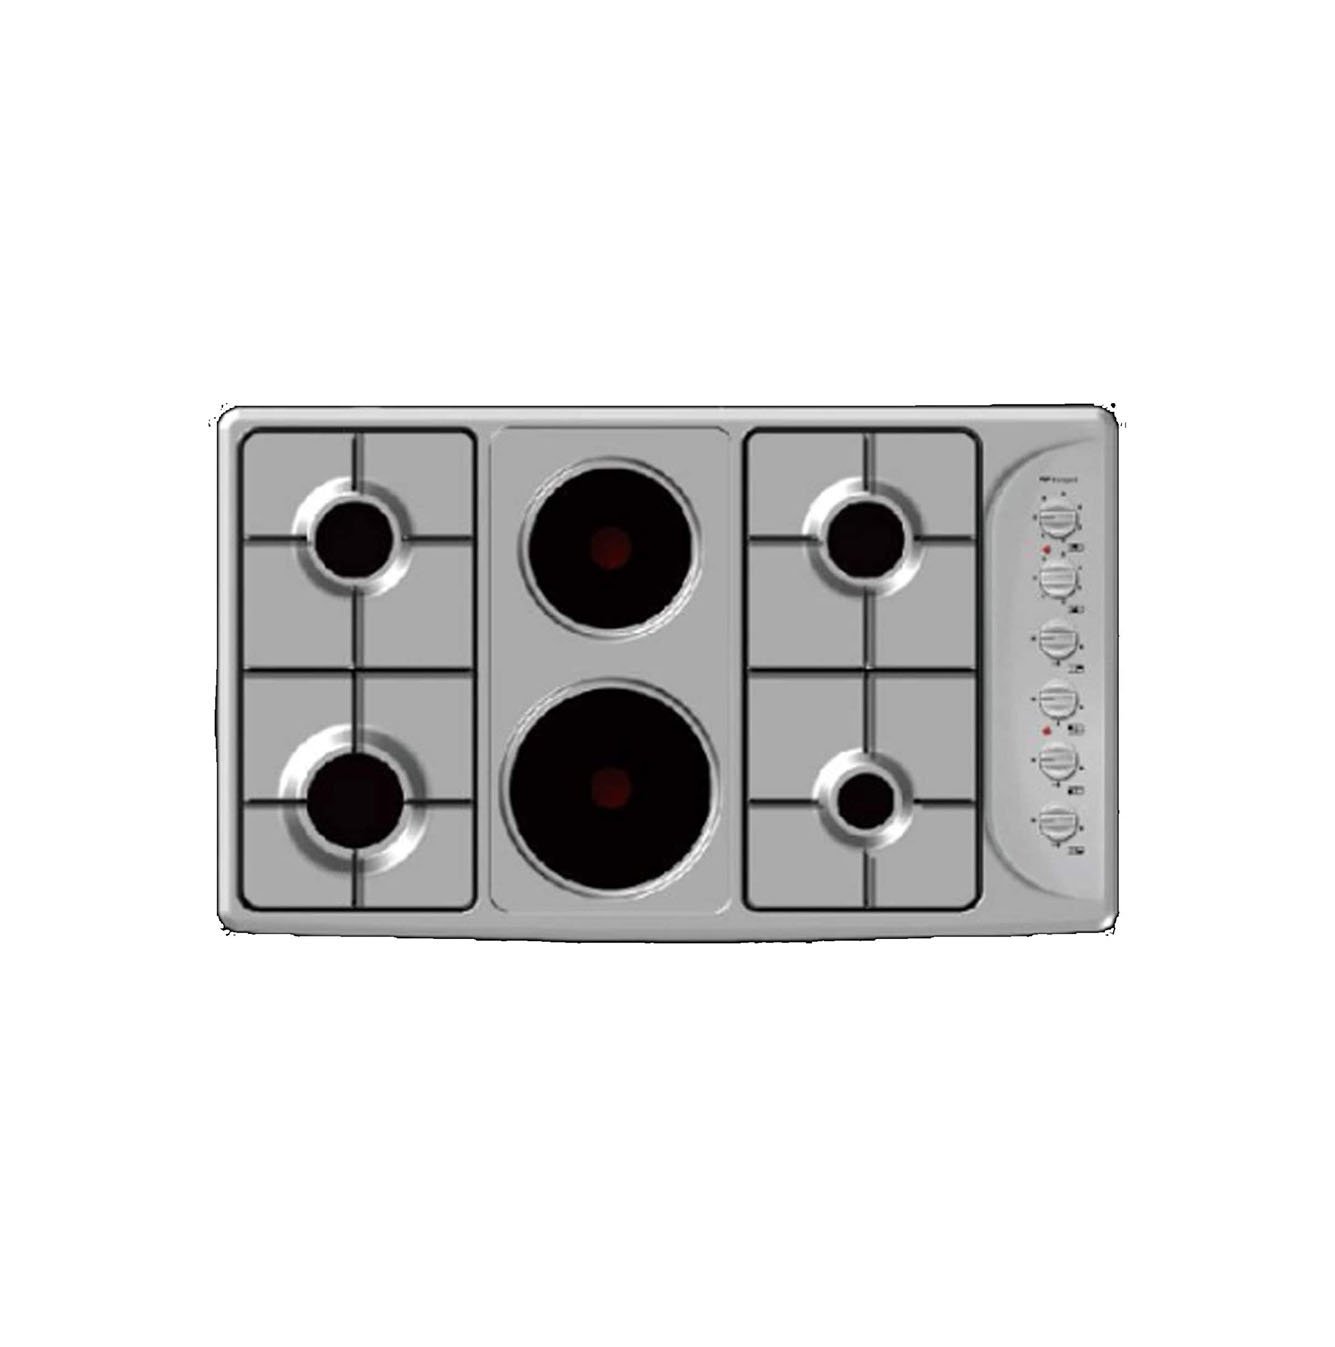 Bompani 90cm Built-In 4 Gas And 2 Electric Hob, Stainless Steel Model – BO293GNL | 1 Year Warranty